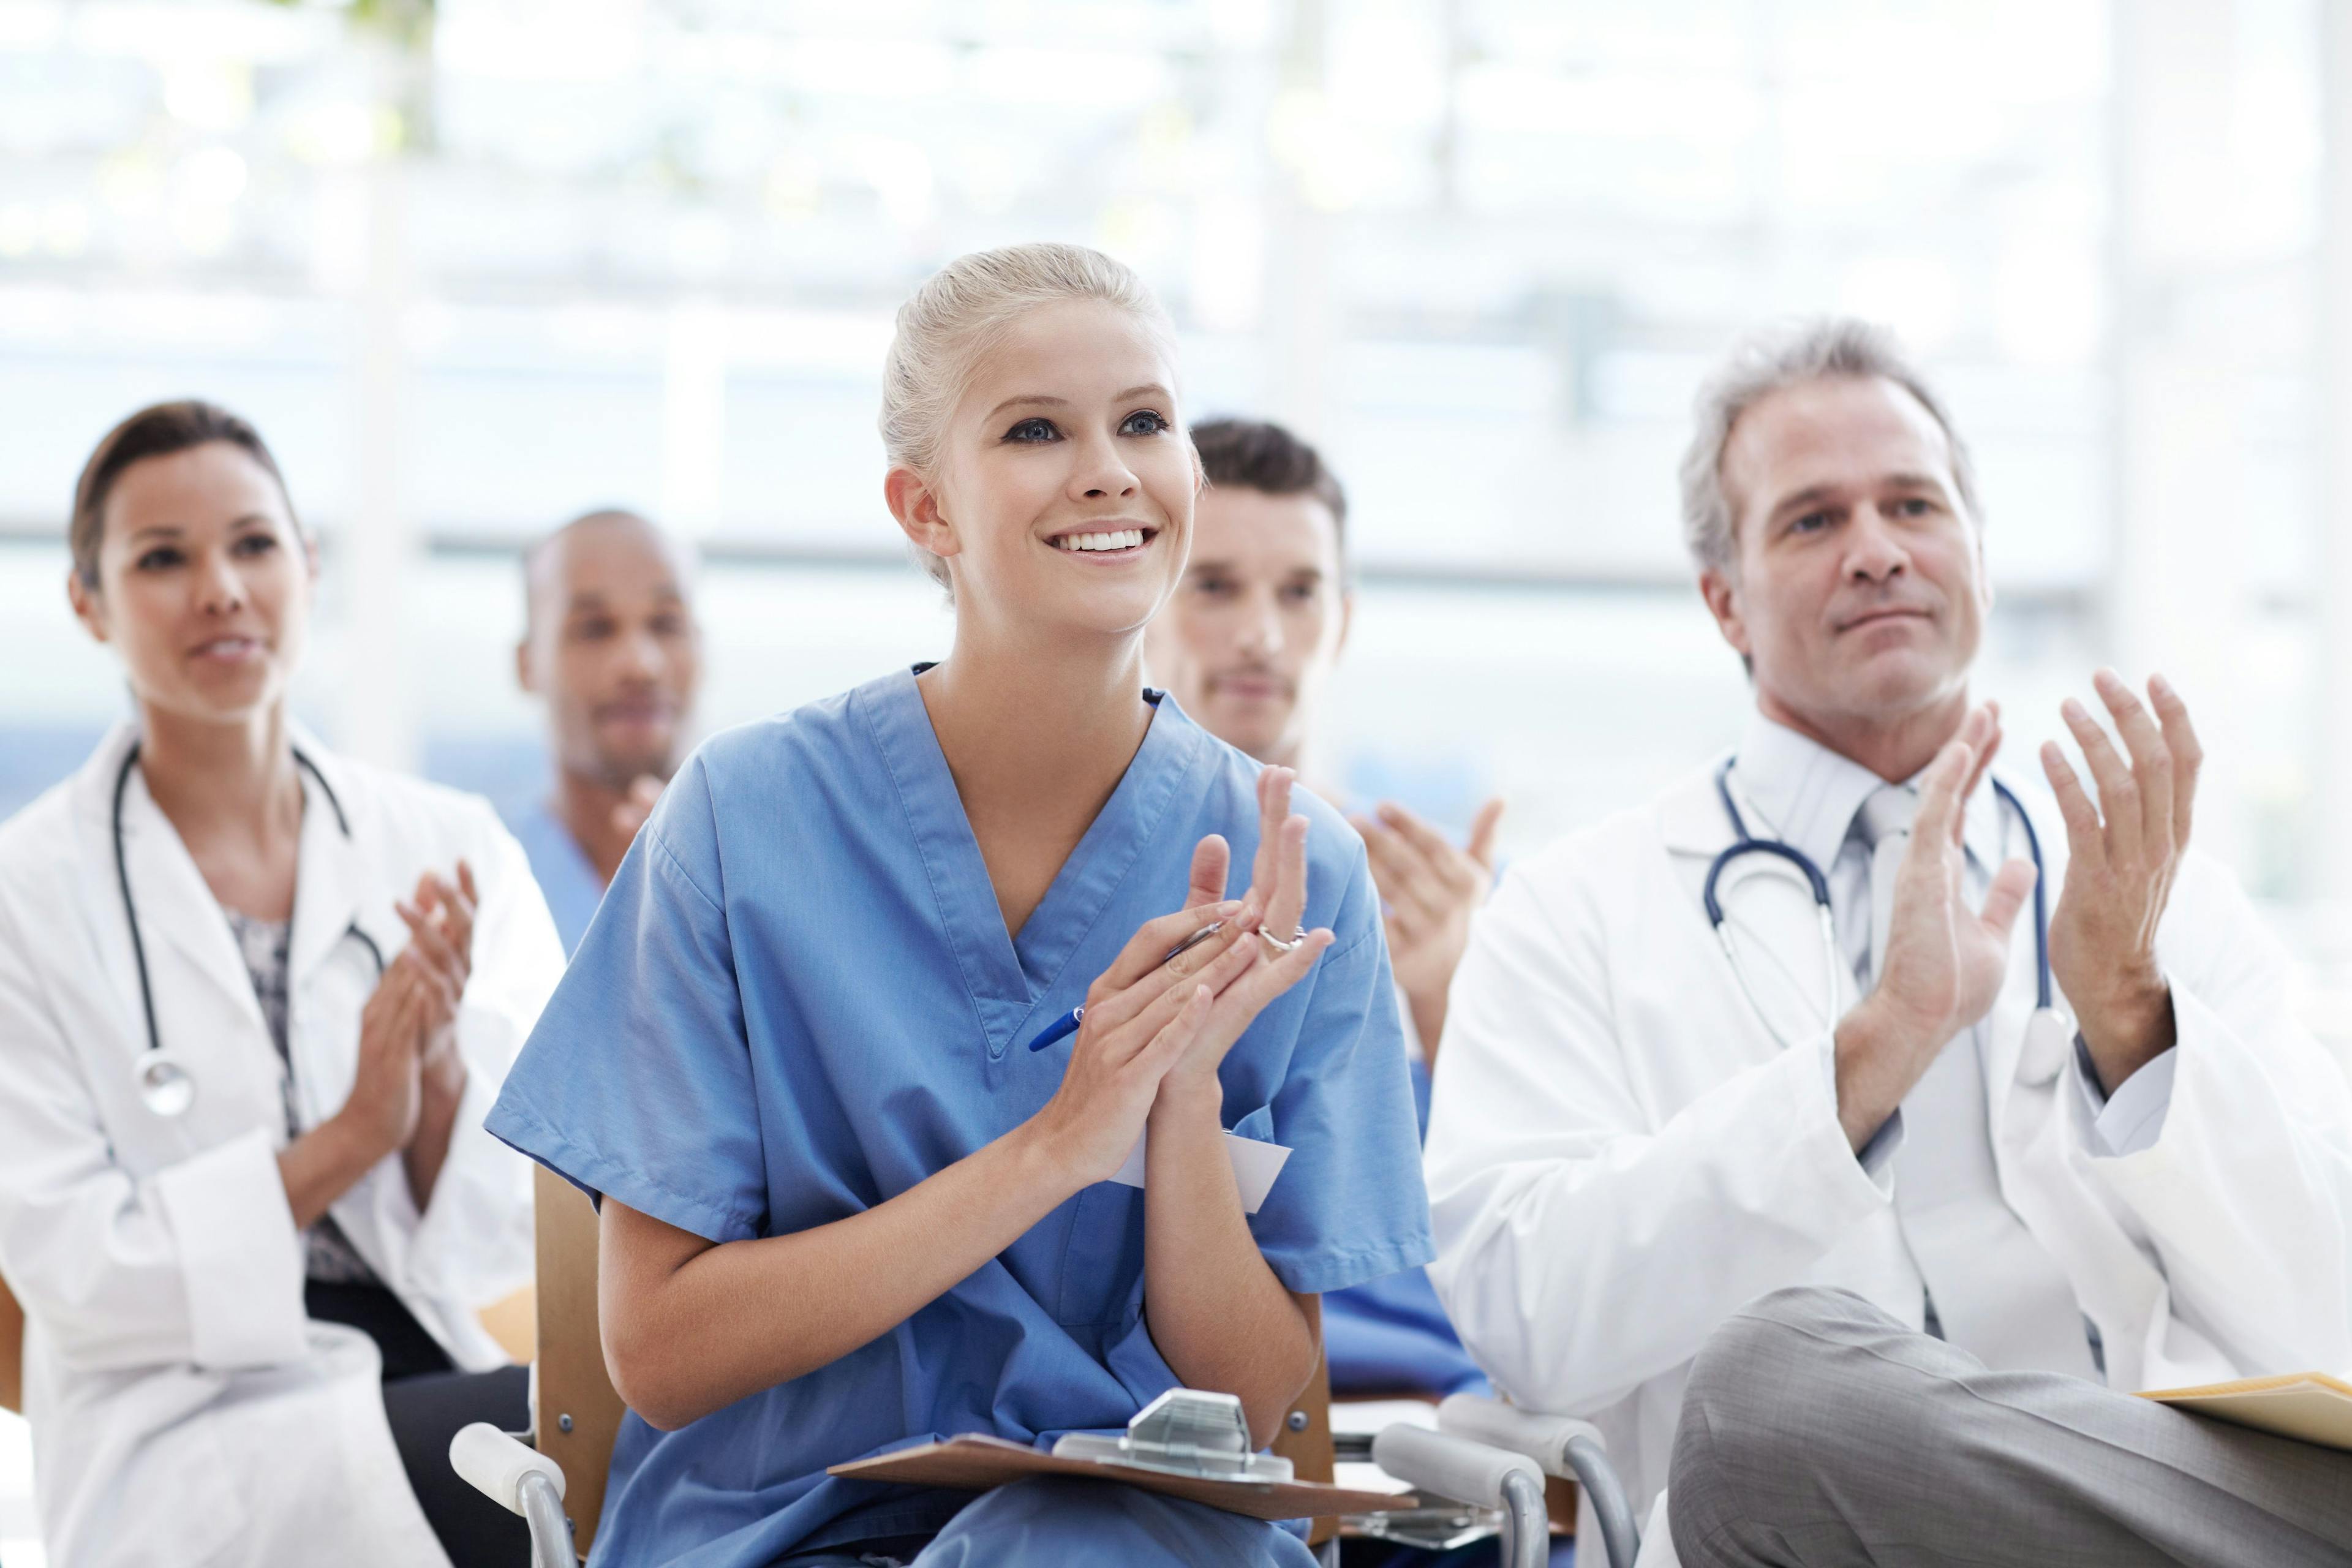 Celebrating breakthroughs in health care. Doctors and nurses applauding their lecturer: © Stigur/people.images.com - stock.adobe.com